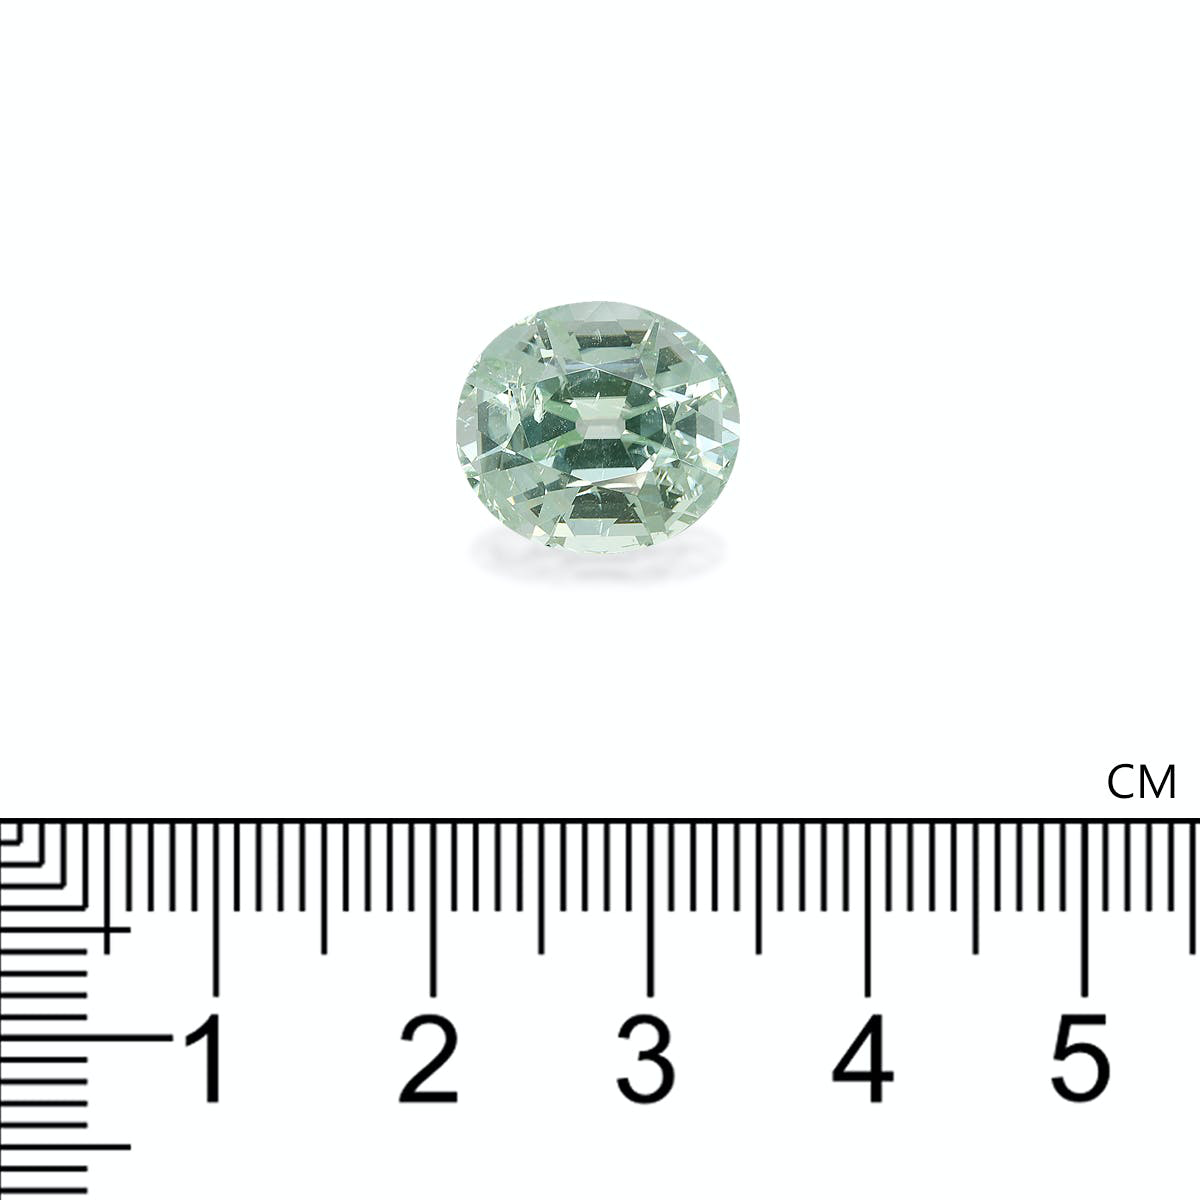 Picture of Mist Green Tourmaline 7.23ct - 13x11mm (TG1535)